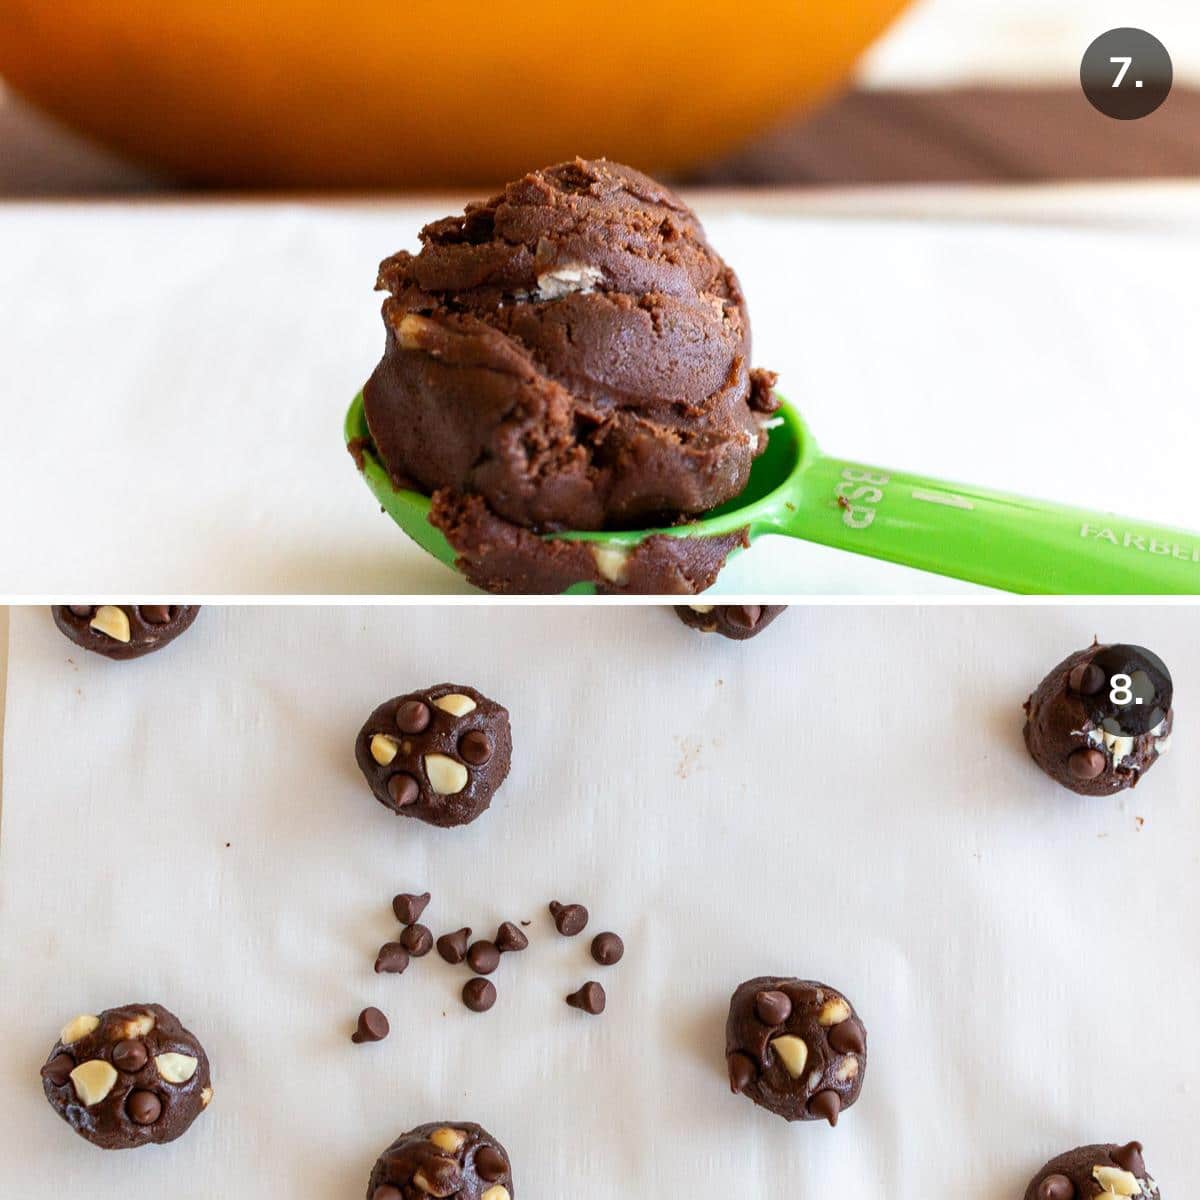 1.5 tablespoon scoops of cookie dough balls placed on a lined baking sheet.